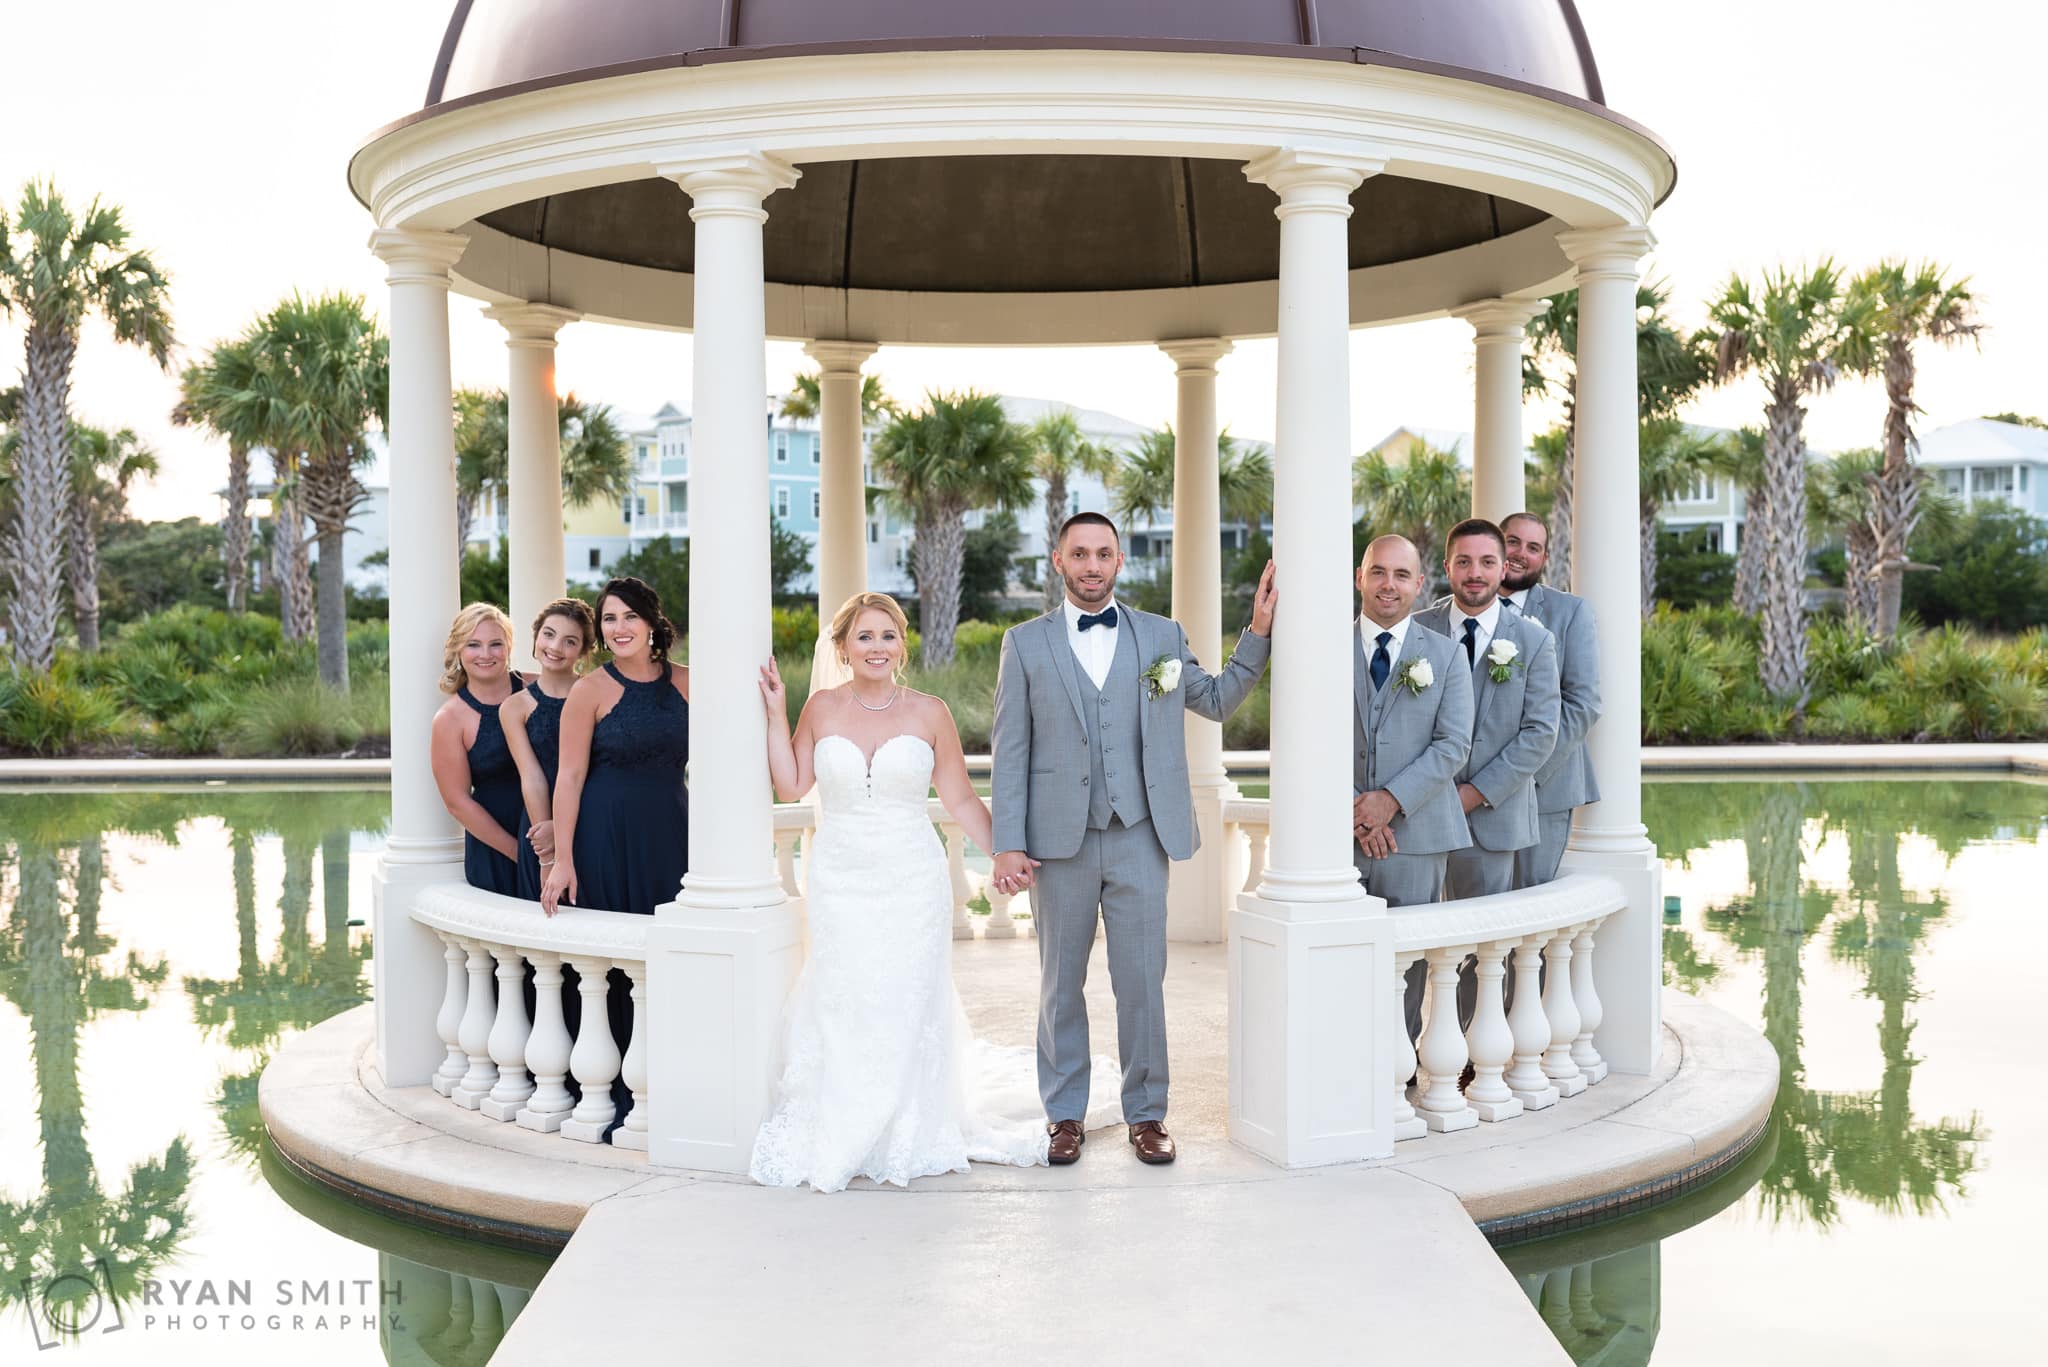 Bridal party in the gazebo   - 21 Main Events - North Myrtle Beach